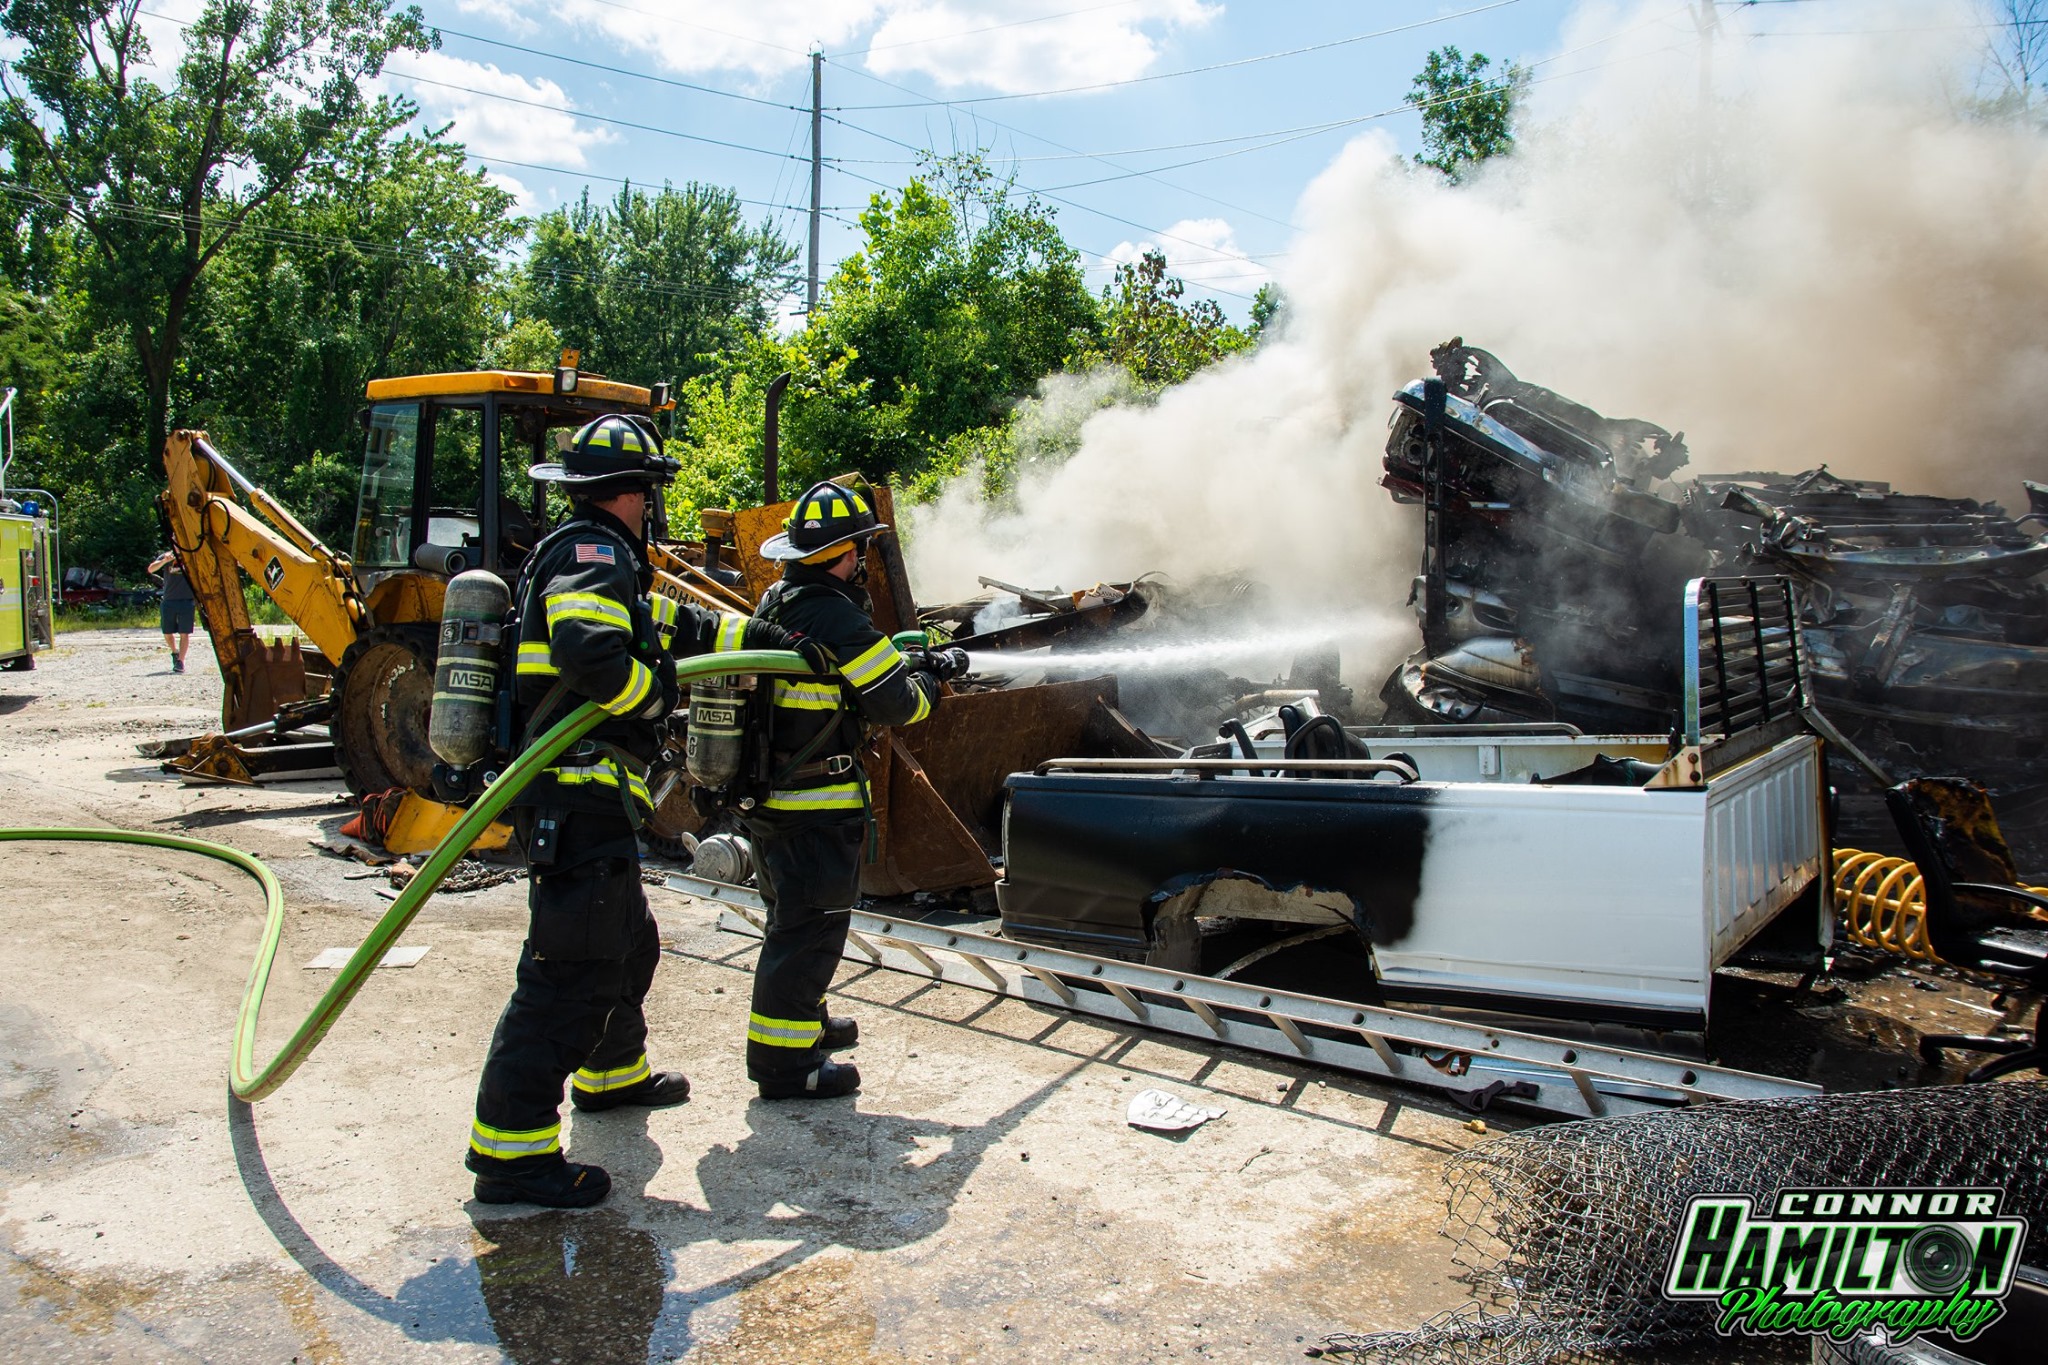  On 07/27/2019, East Side Fire responded for a fire in a junk yard with automatic mutual aid from Swansea Fire Department. Belleville Fire Department and Northwest Fire Department also responded mutual aid. 